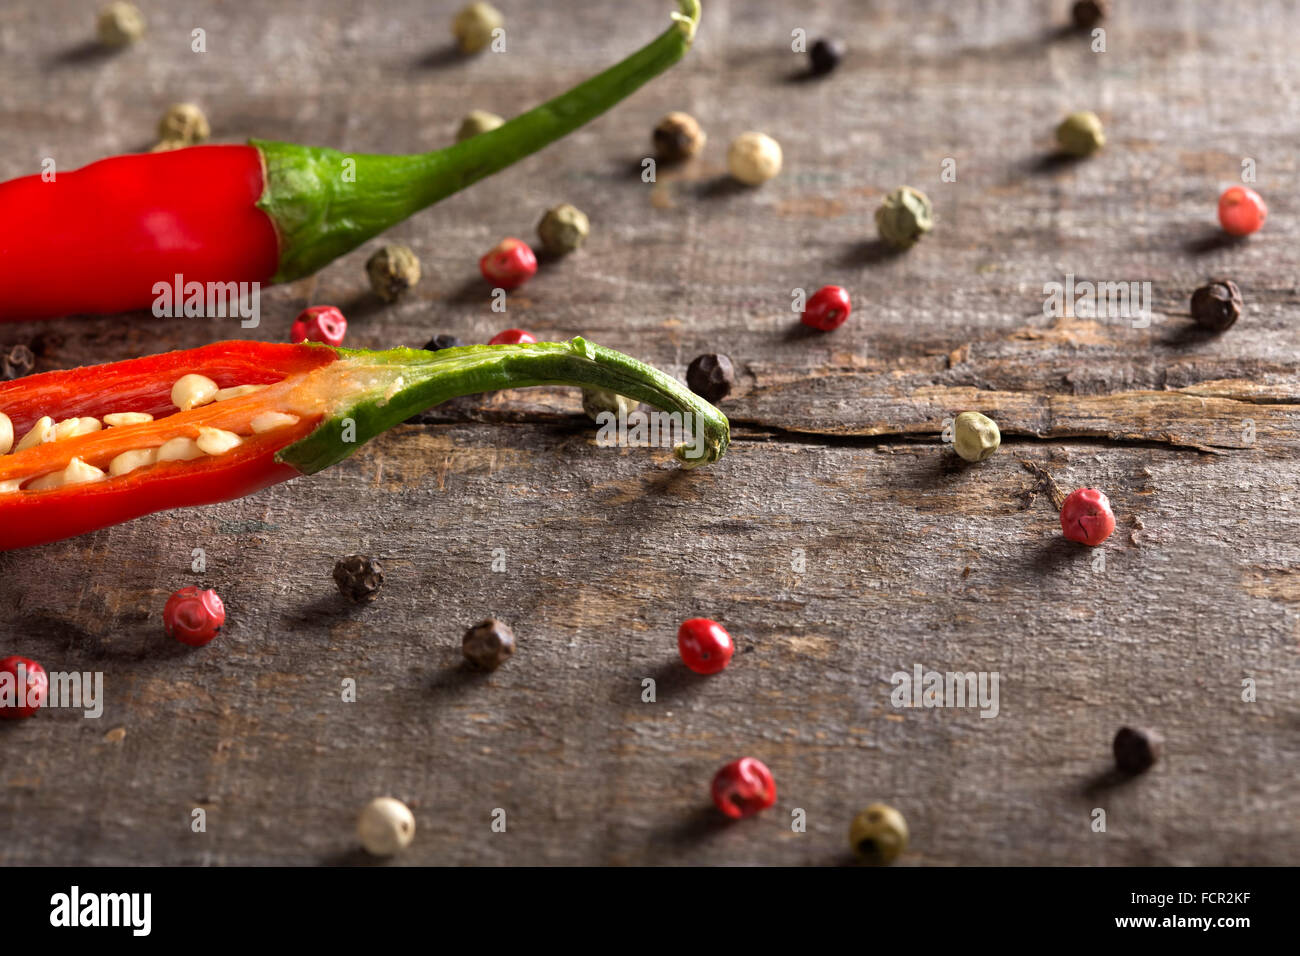 Red chili peppers on wood with peppercorns Stock Photo